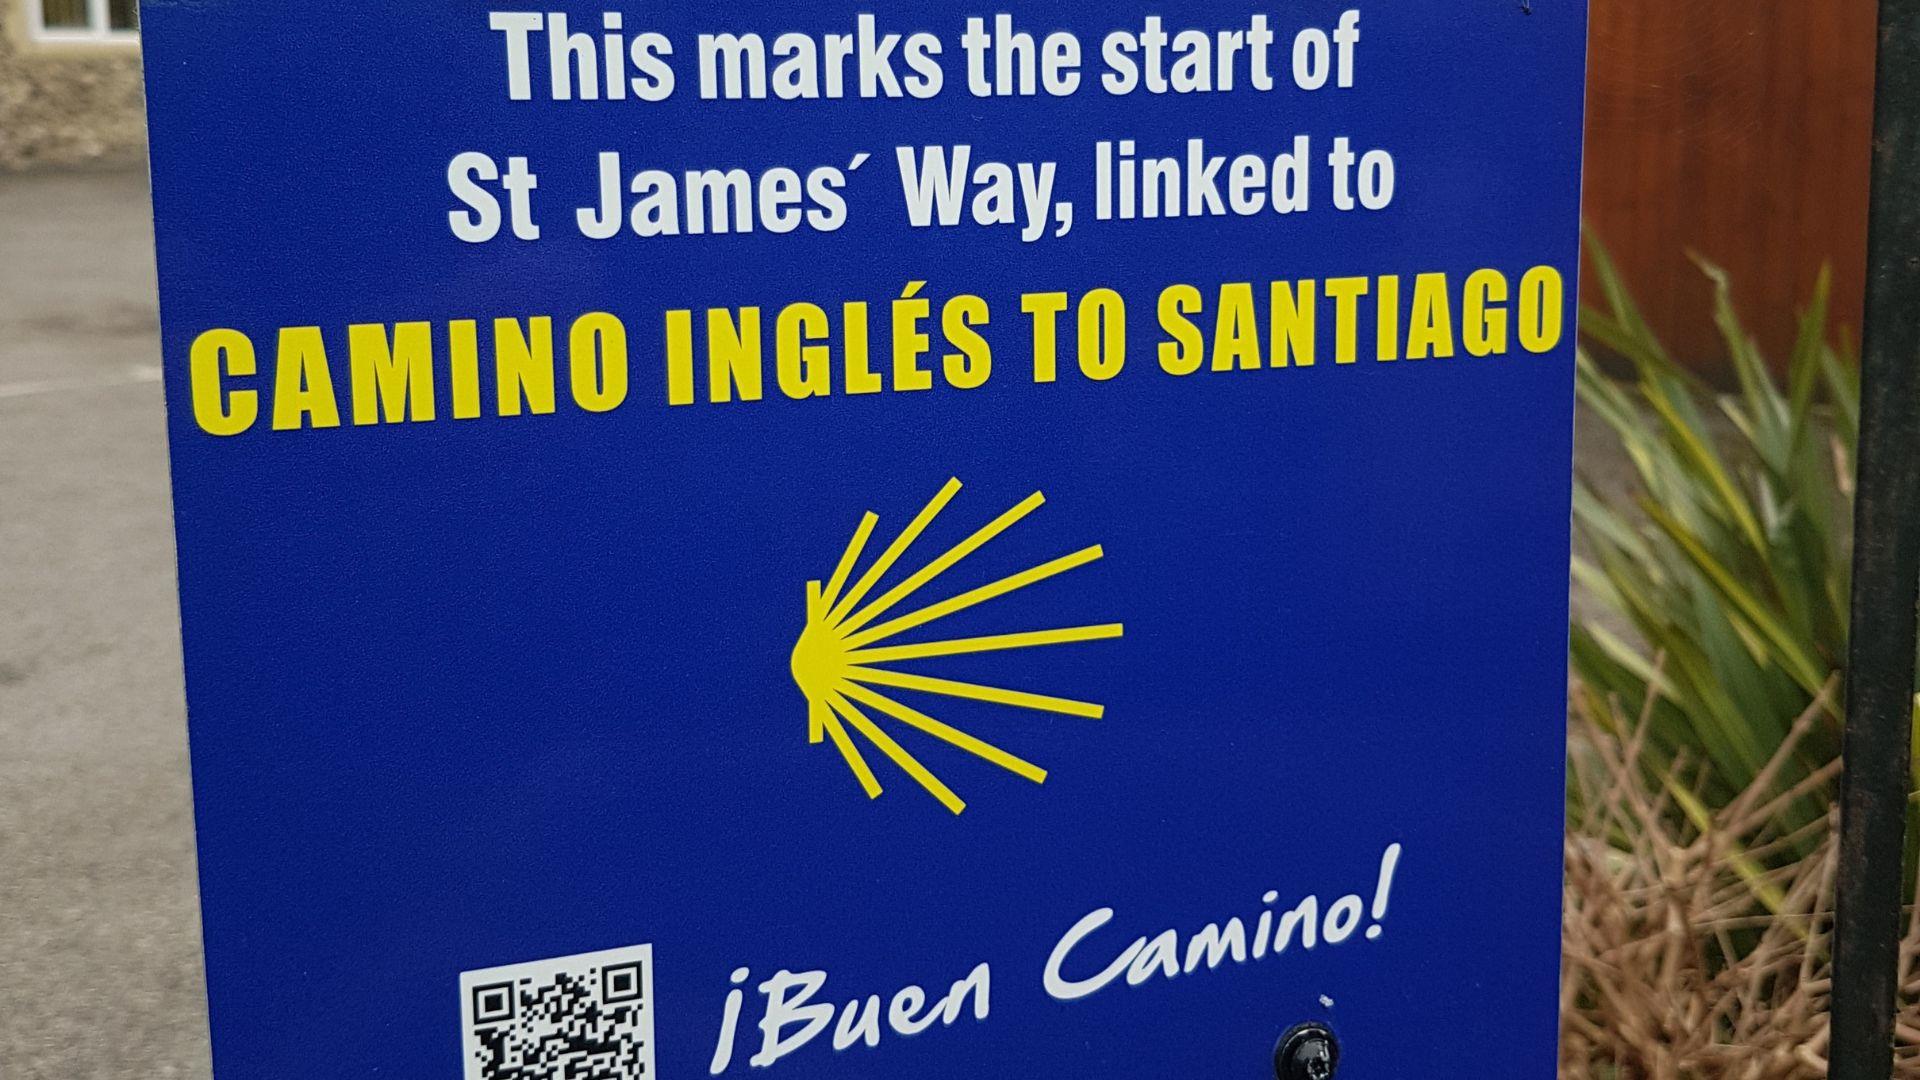 sign showing start of St James Way